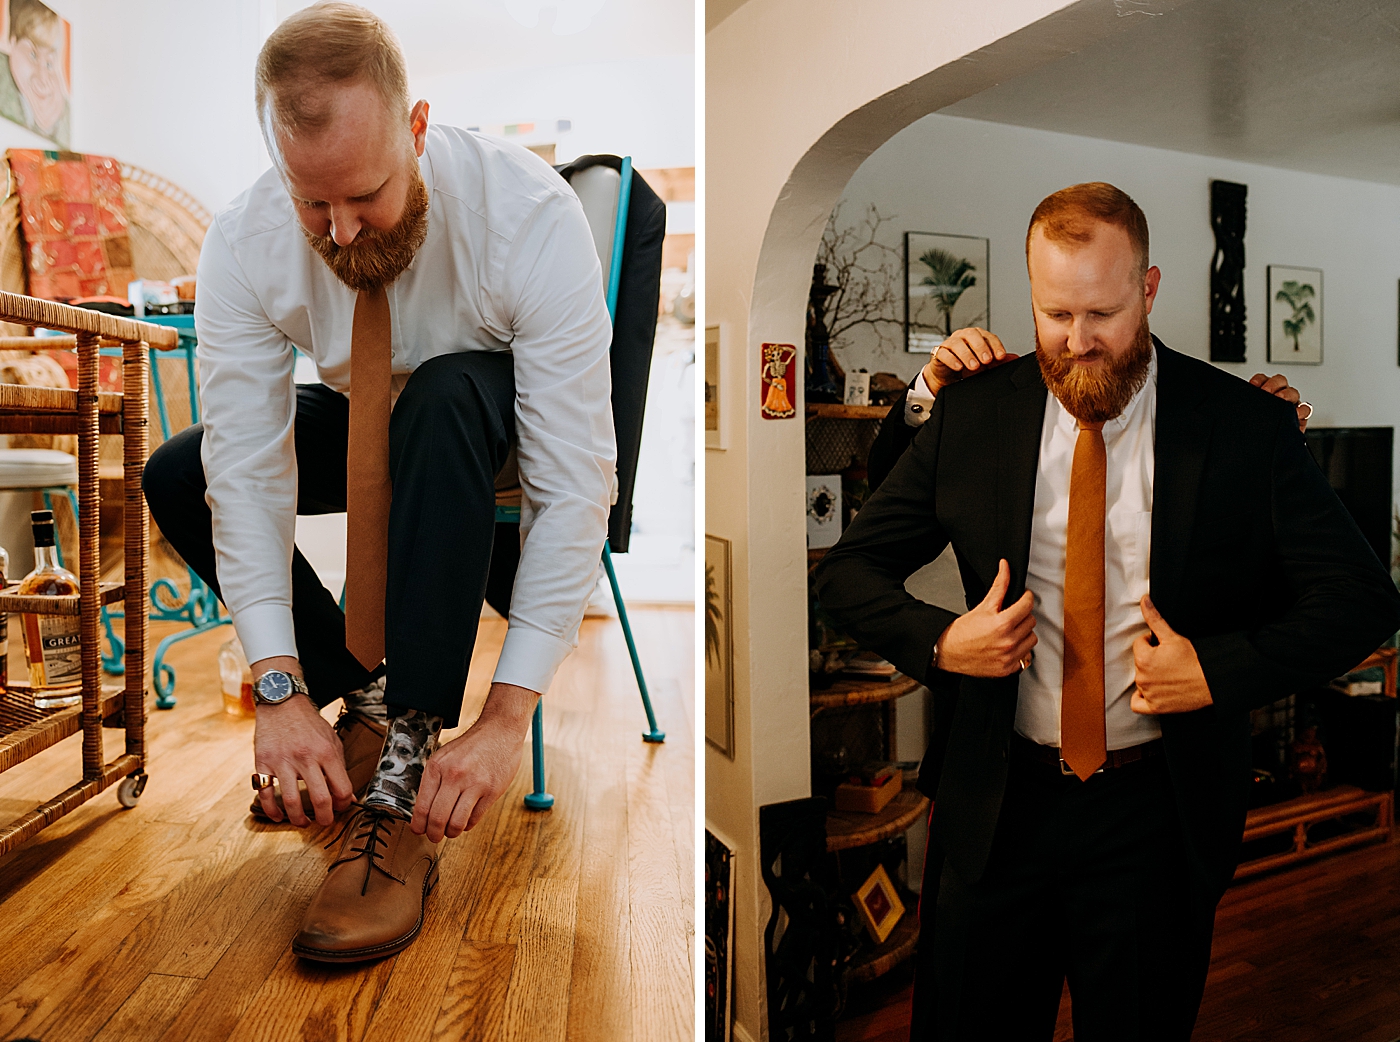 Groom getting ready putting shoes and jacket on Historic Stranahan House Wedding Photography captured by South Florida Wedding Photographer Maggie Alvarez Photography